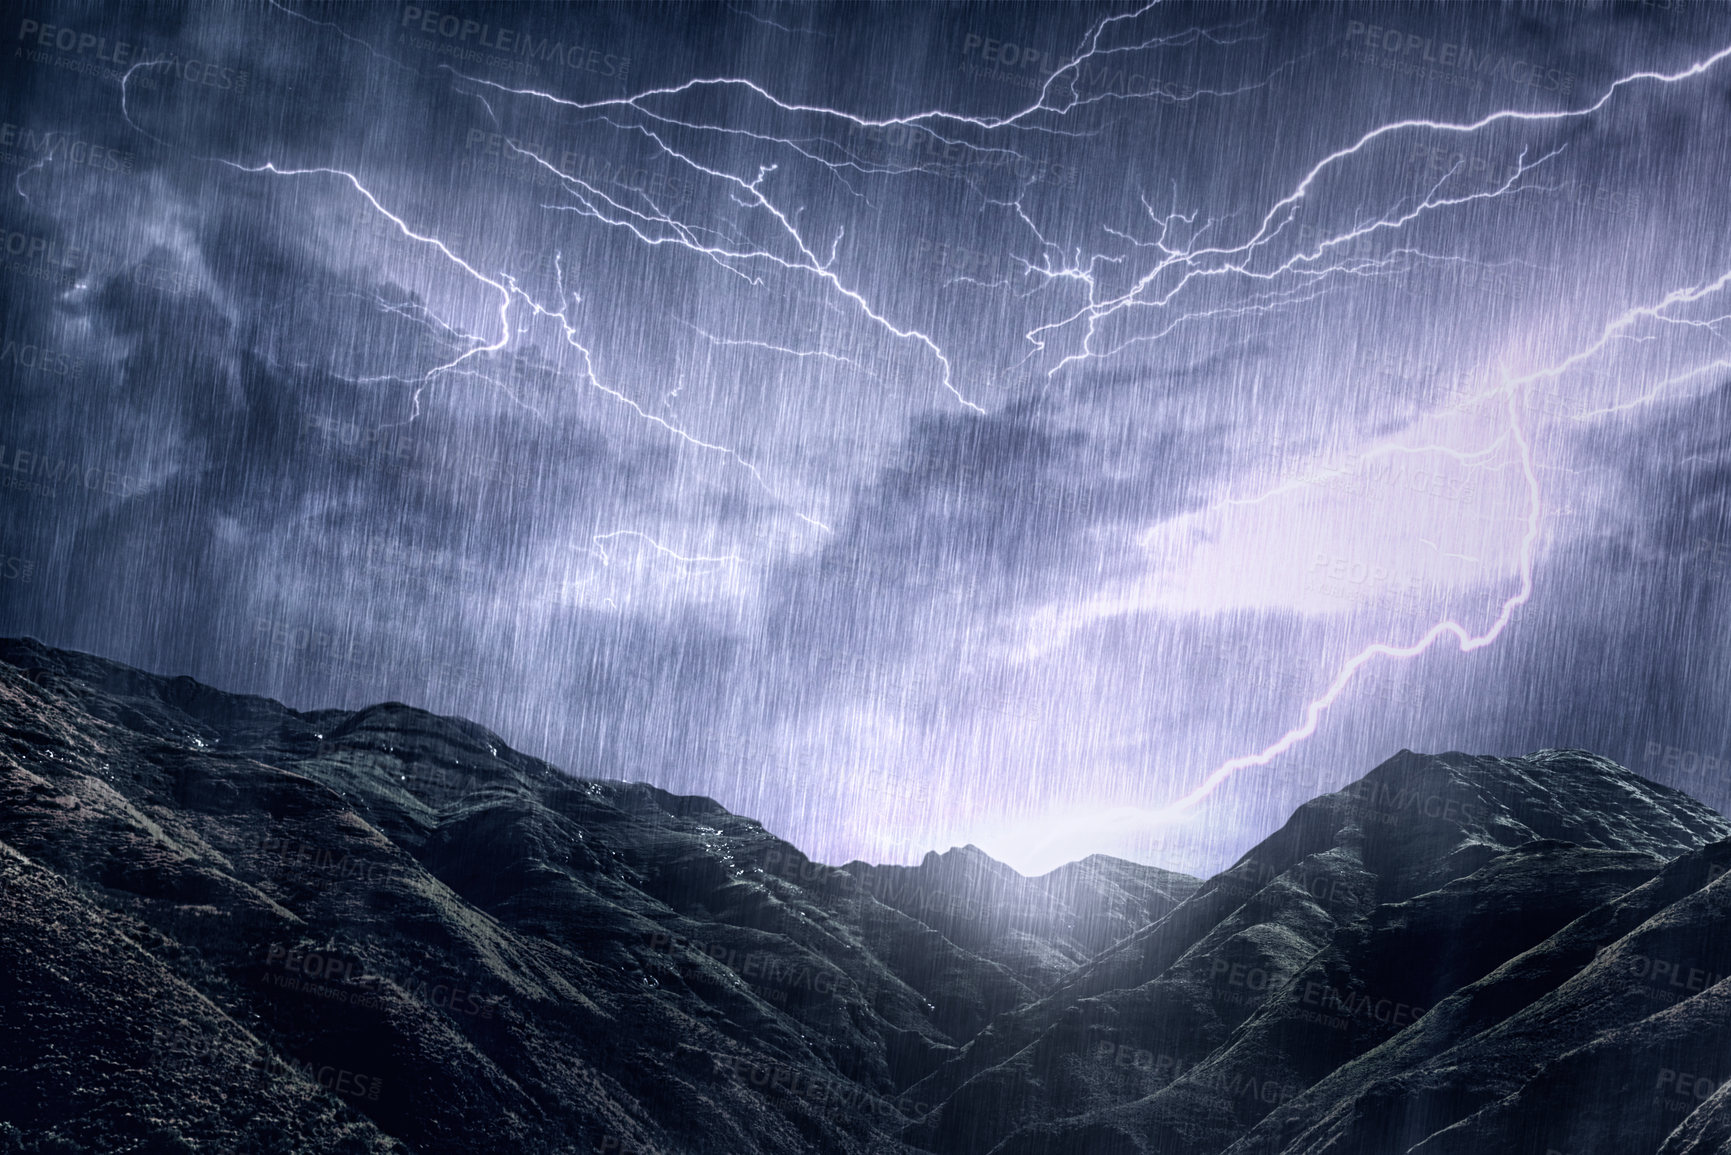 Buy stock photo Shot of a dramatic thunderstorm over a mountain